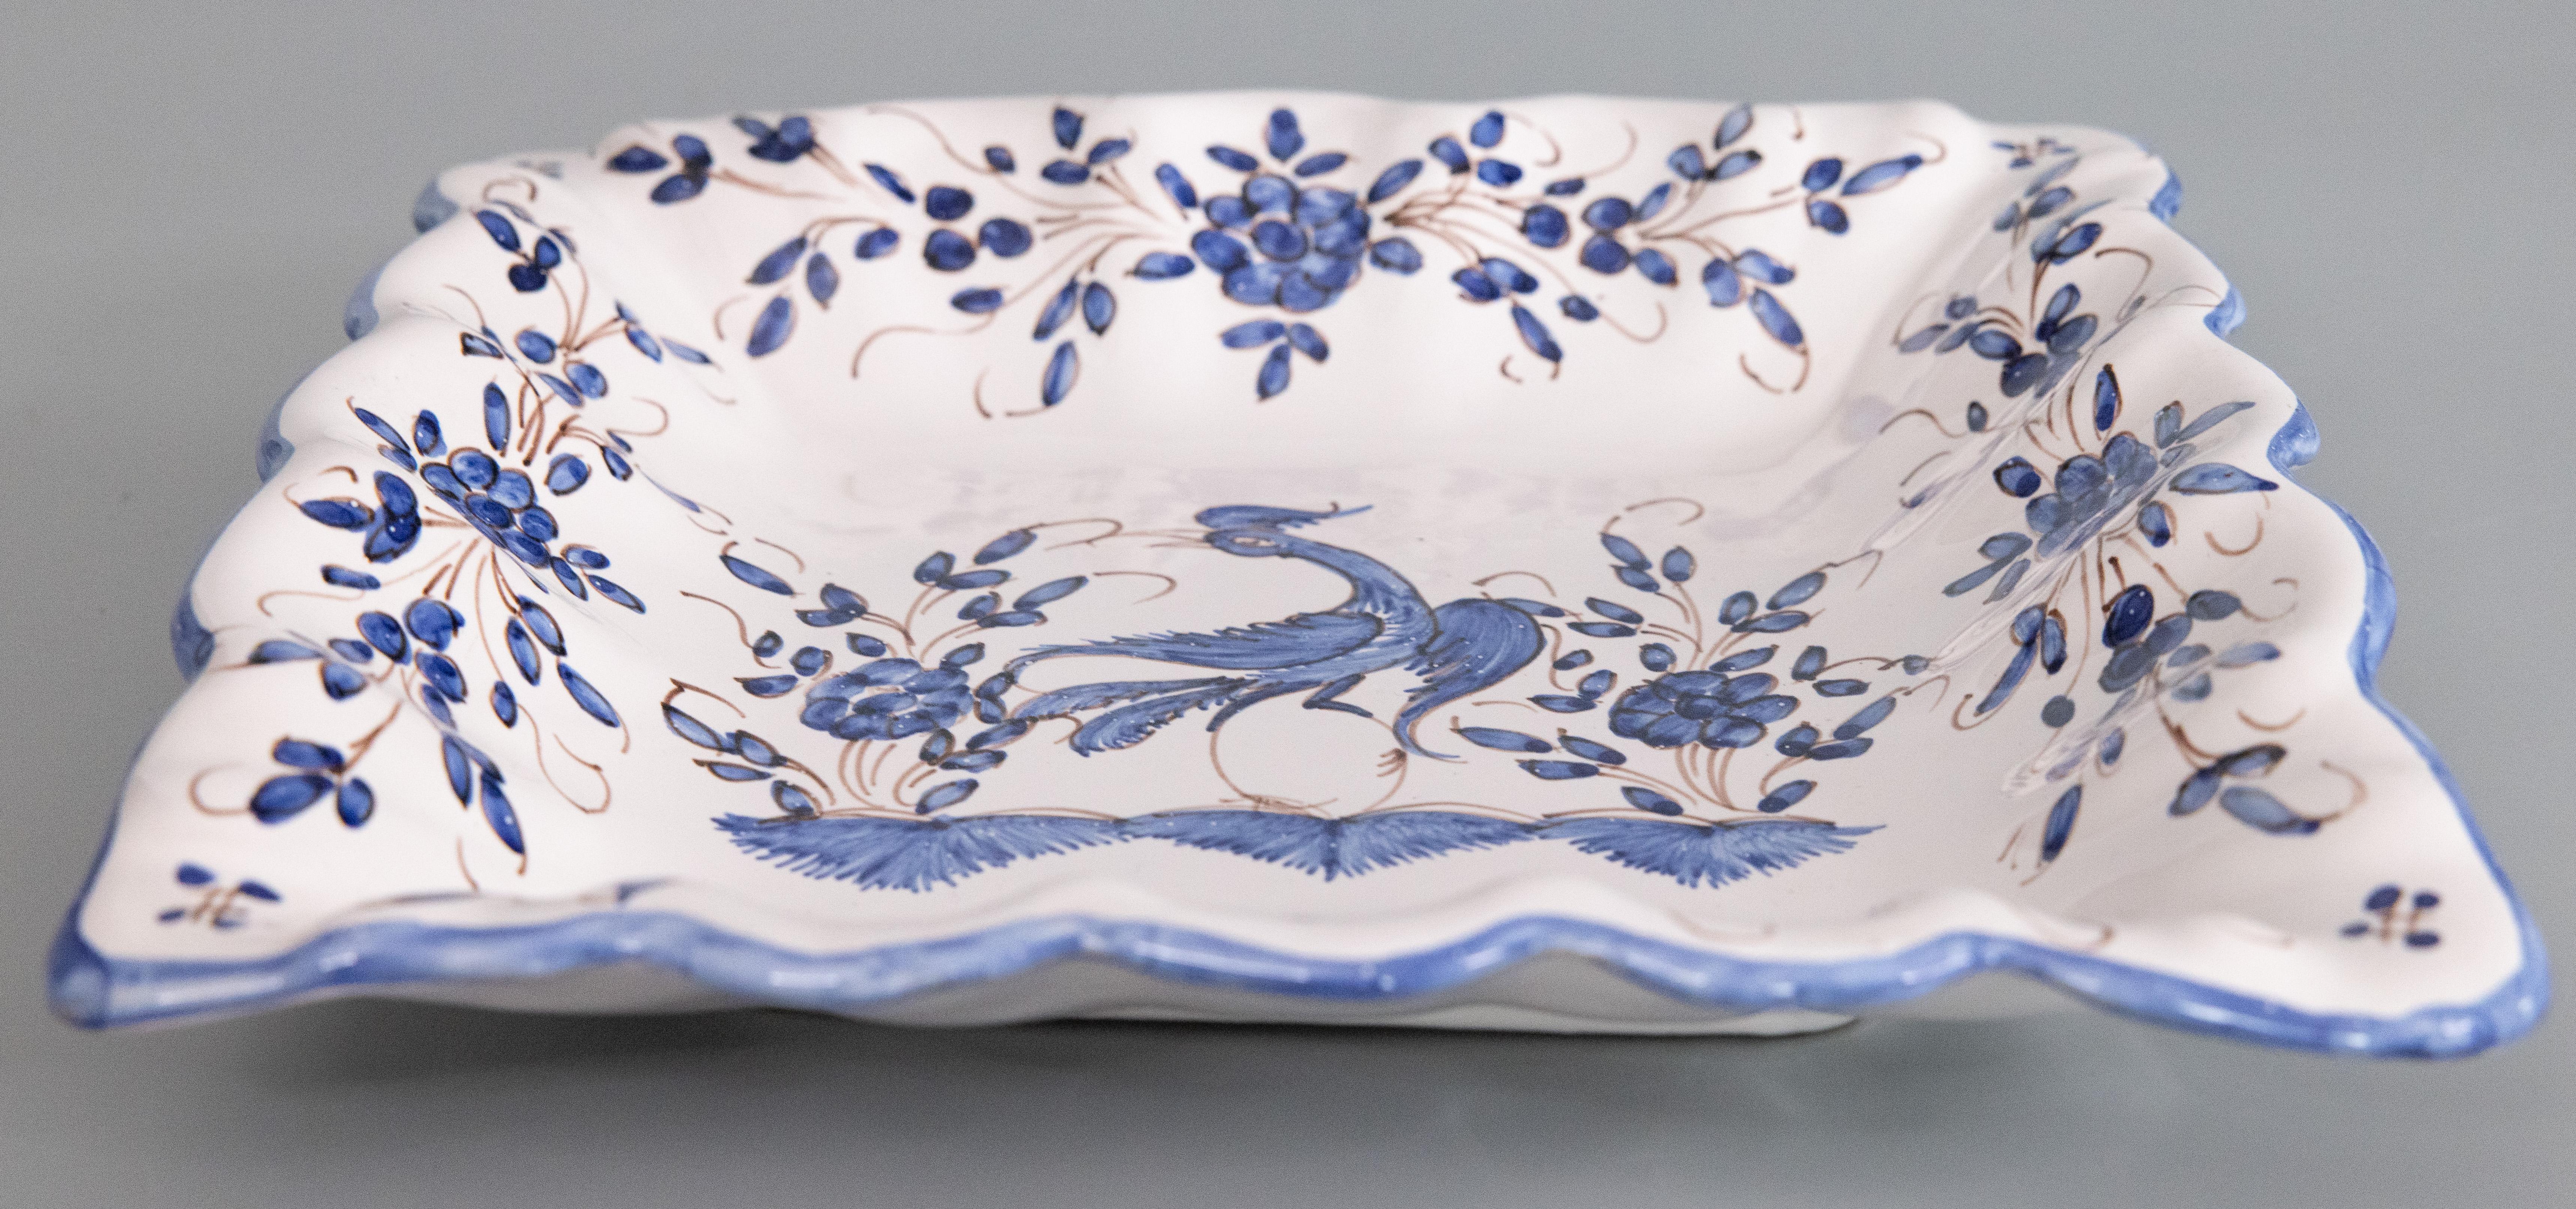 A gorgeous mid-20th century French Moustiers faience square plate or shallow bowl. Hand painted maker's mark on reverse. This beautiful plate is hand painted with a bird and floral design and charming ruffled edge. It would be lovely displayed with